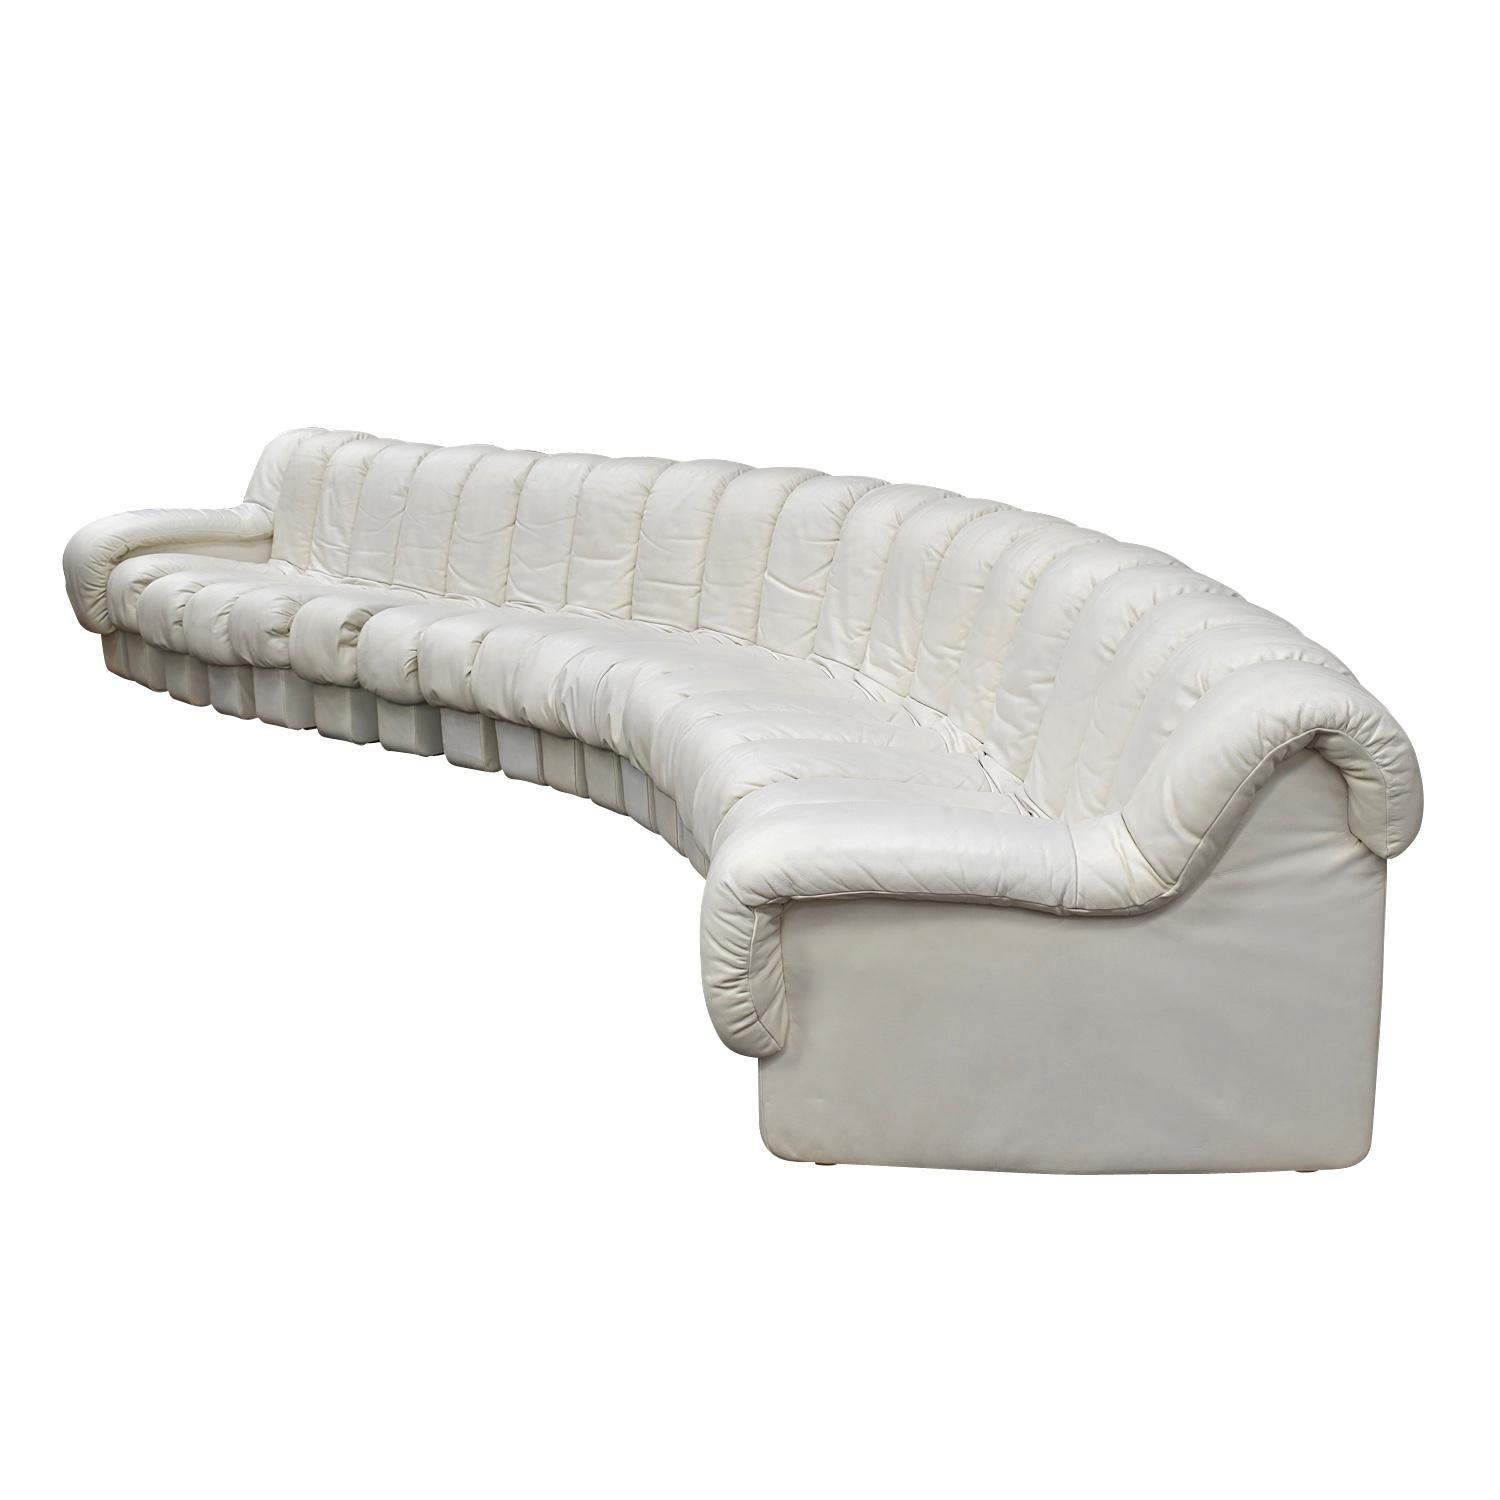 Amazing 20-piece De Sede DS-600 ‘Snake’ sectional sofa in a beautiful and much wanted pearl crème white leather.
The sections in the sofa are attached together with very heavy zippers and a metal hinge which allows the sofa to be bent and curved as